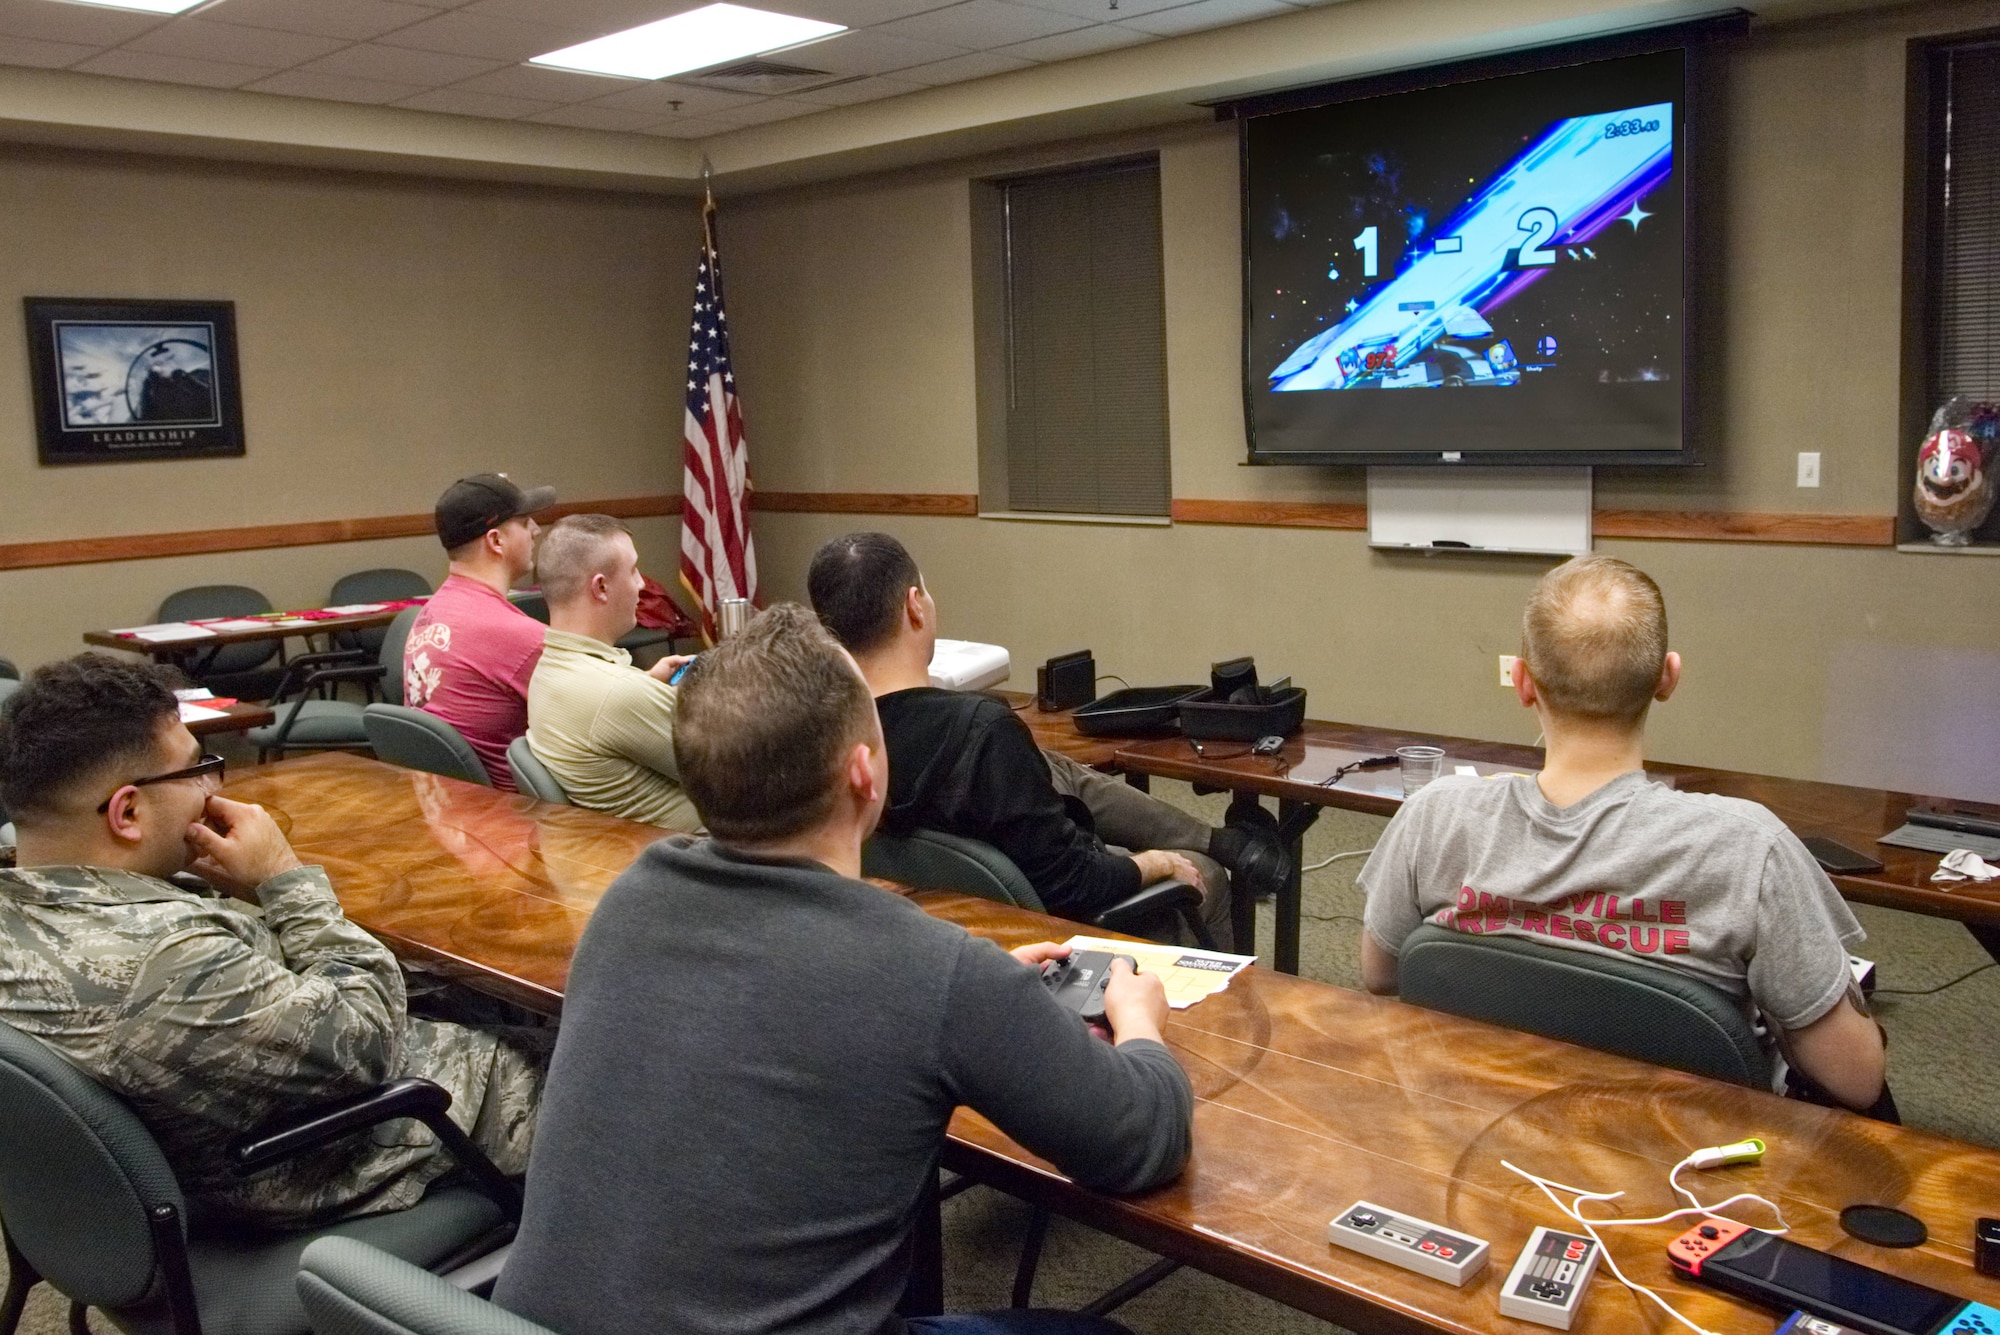 Airmen from Grissom Air Reserve Base, Ind., participate in a Super Smash Bros. tournament held by Airman & Family Readiness, Feb. 8, 2020. Master Sgt. Hansel Orozco, 434th Air Refueling Wing religious affairs superintendent, organized the tournament as part of his second game night event.